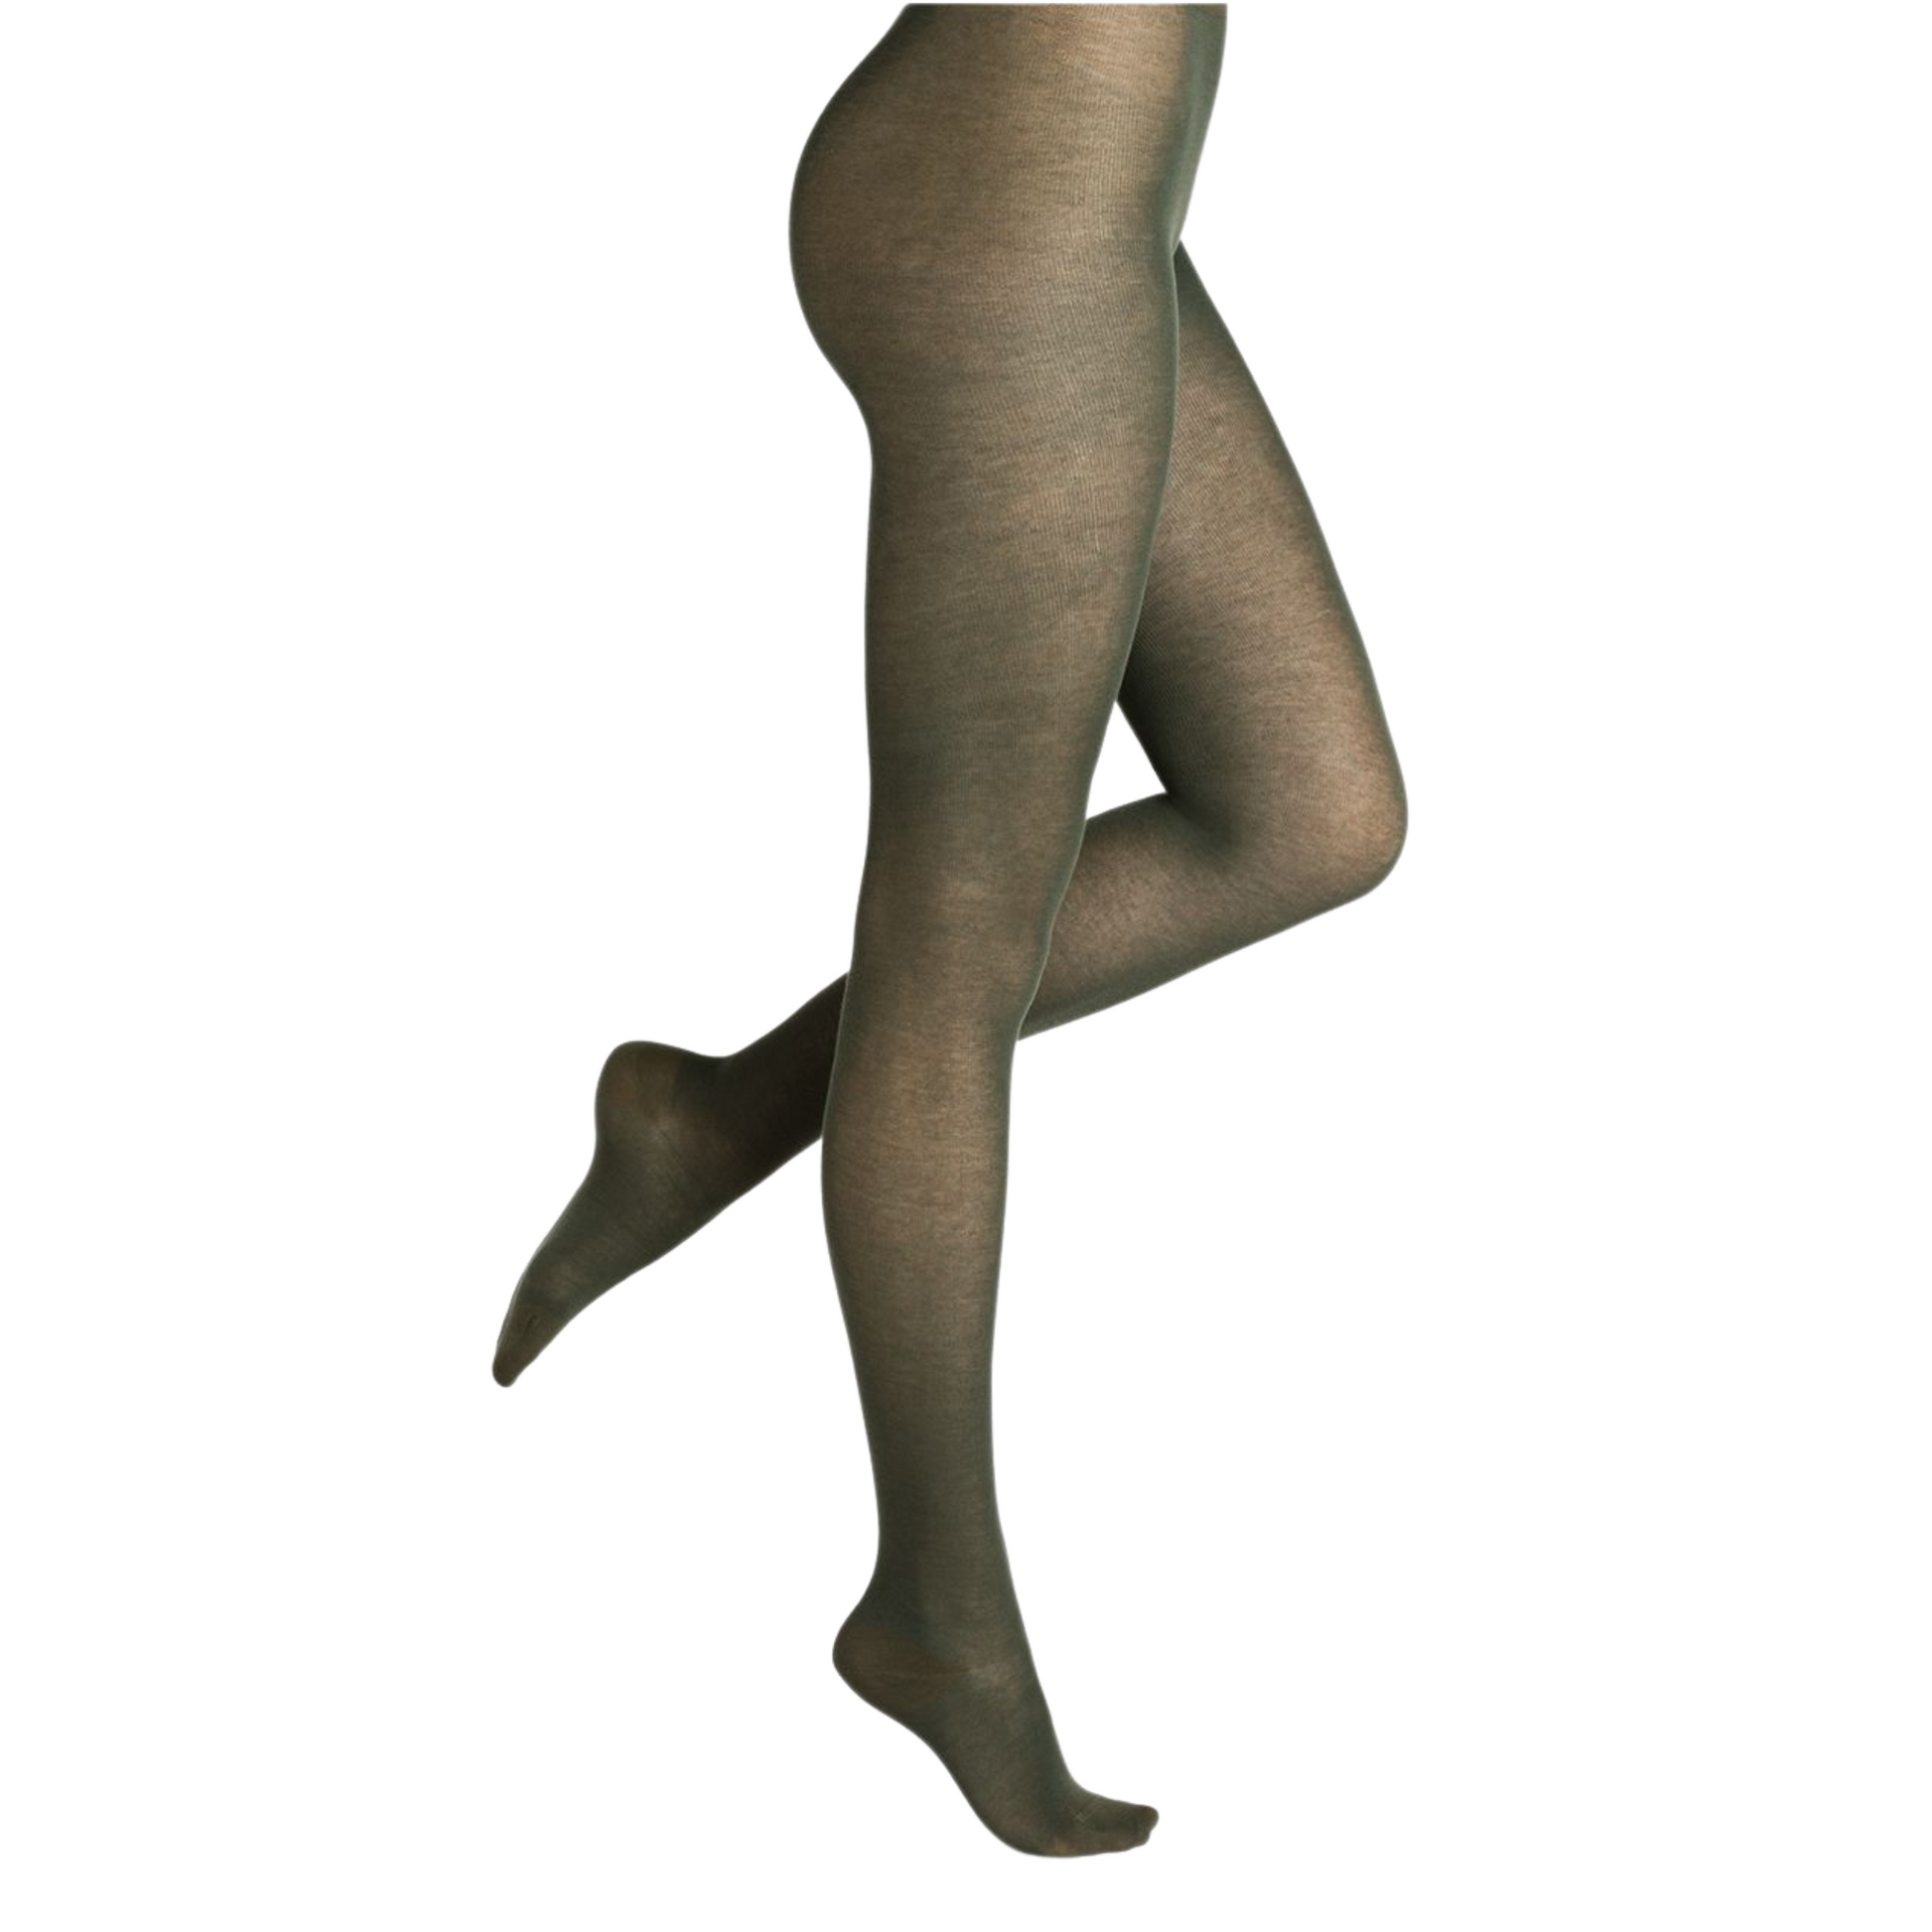 Translucent green tights on lower body.